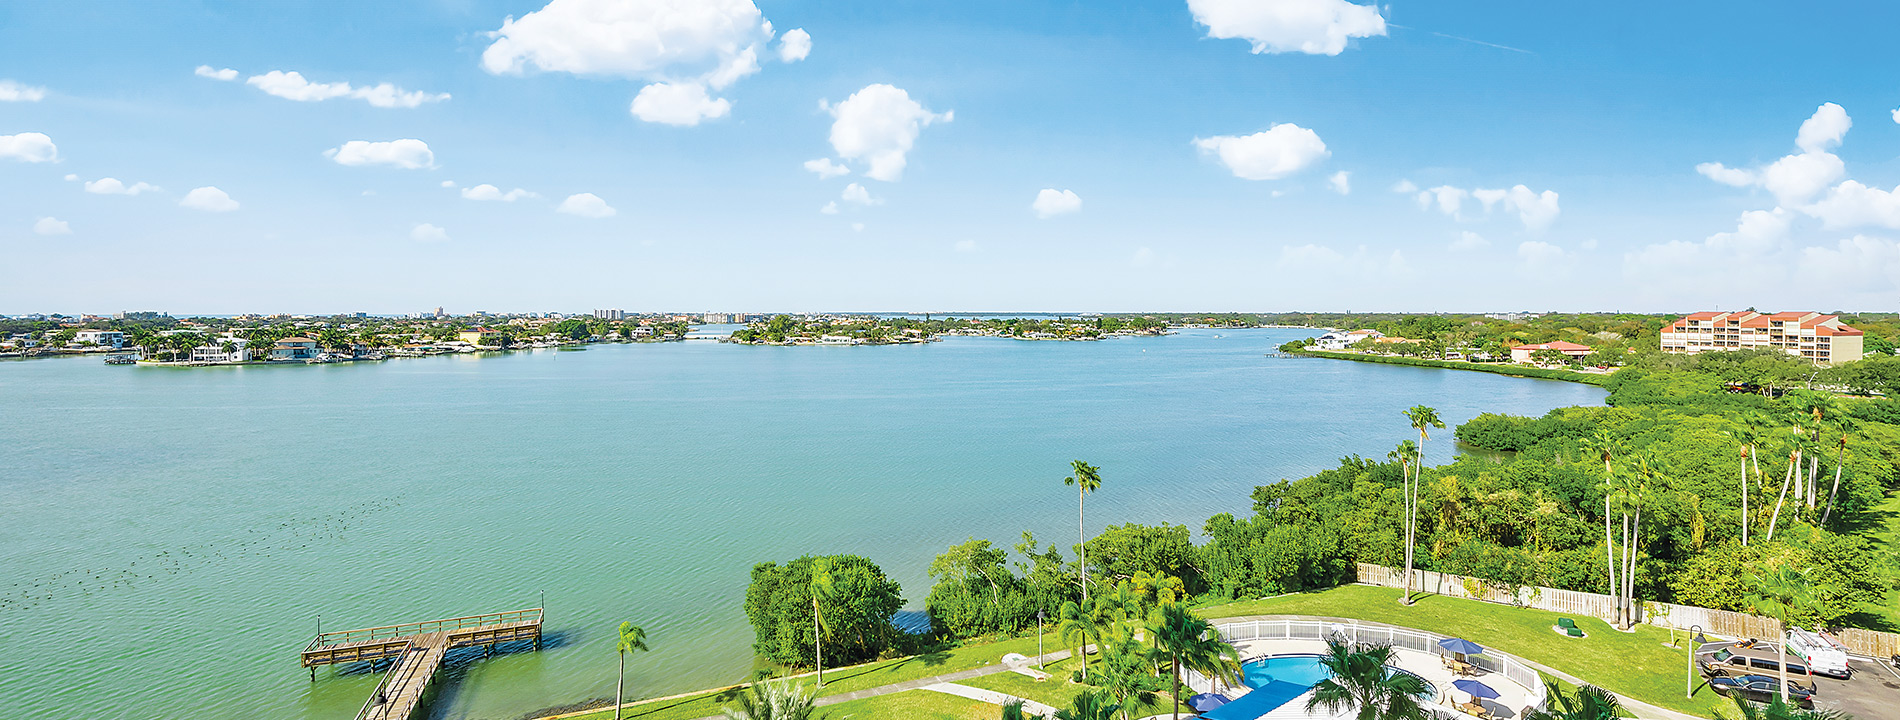 An aerial view of the property along the waters edge with palm trees and the city in the distance.